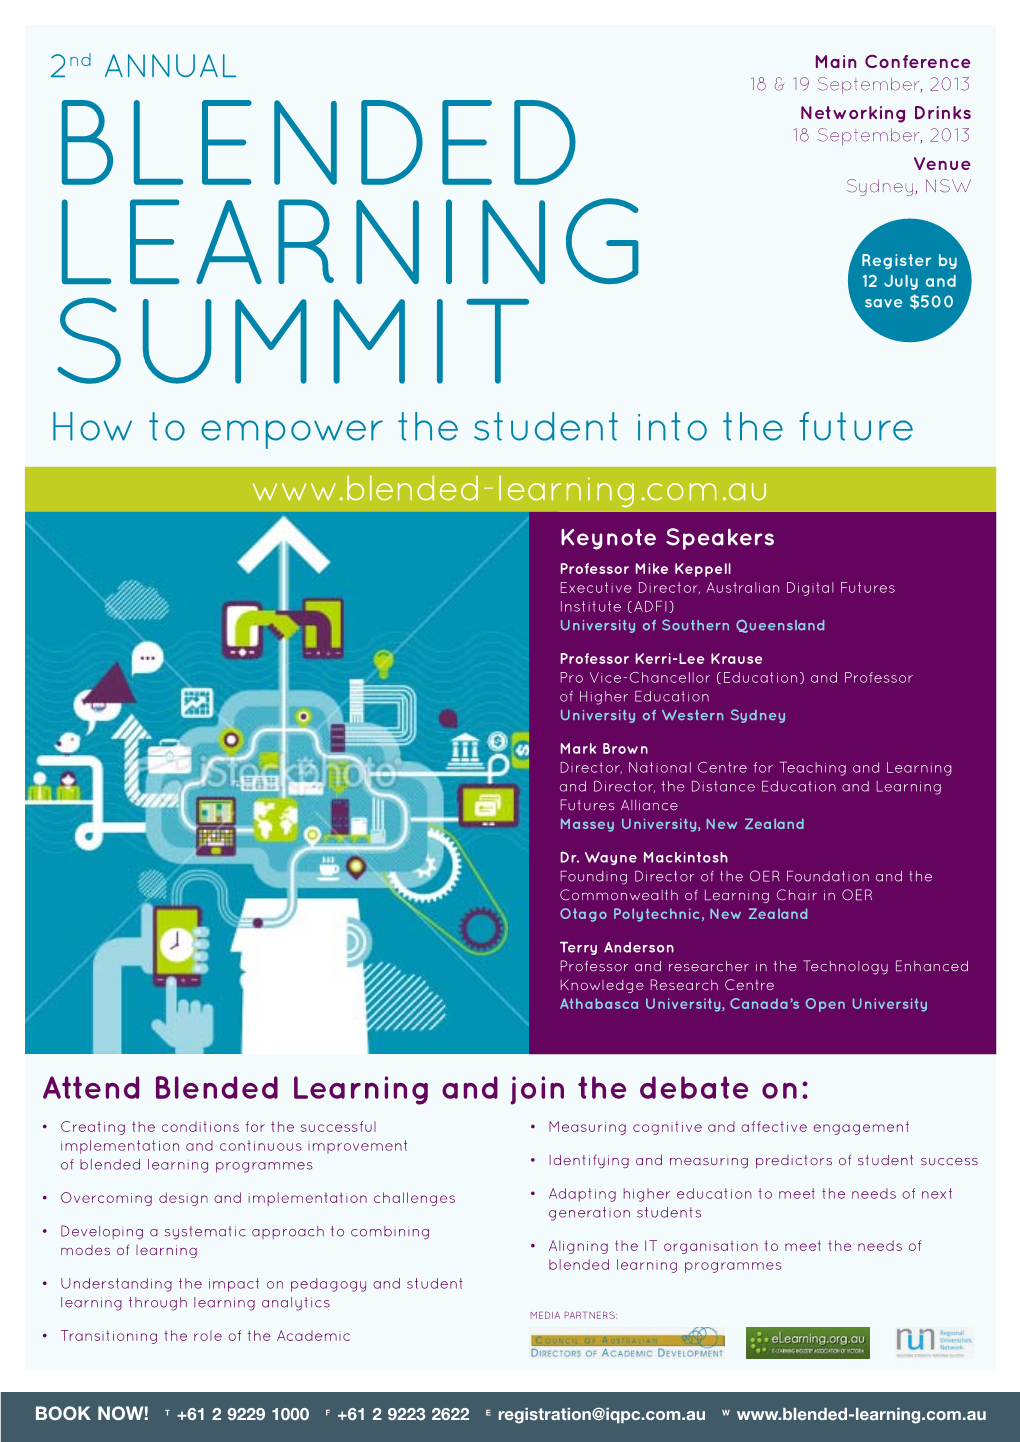 Annual Blended Learning Summit